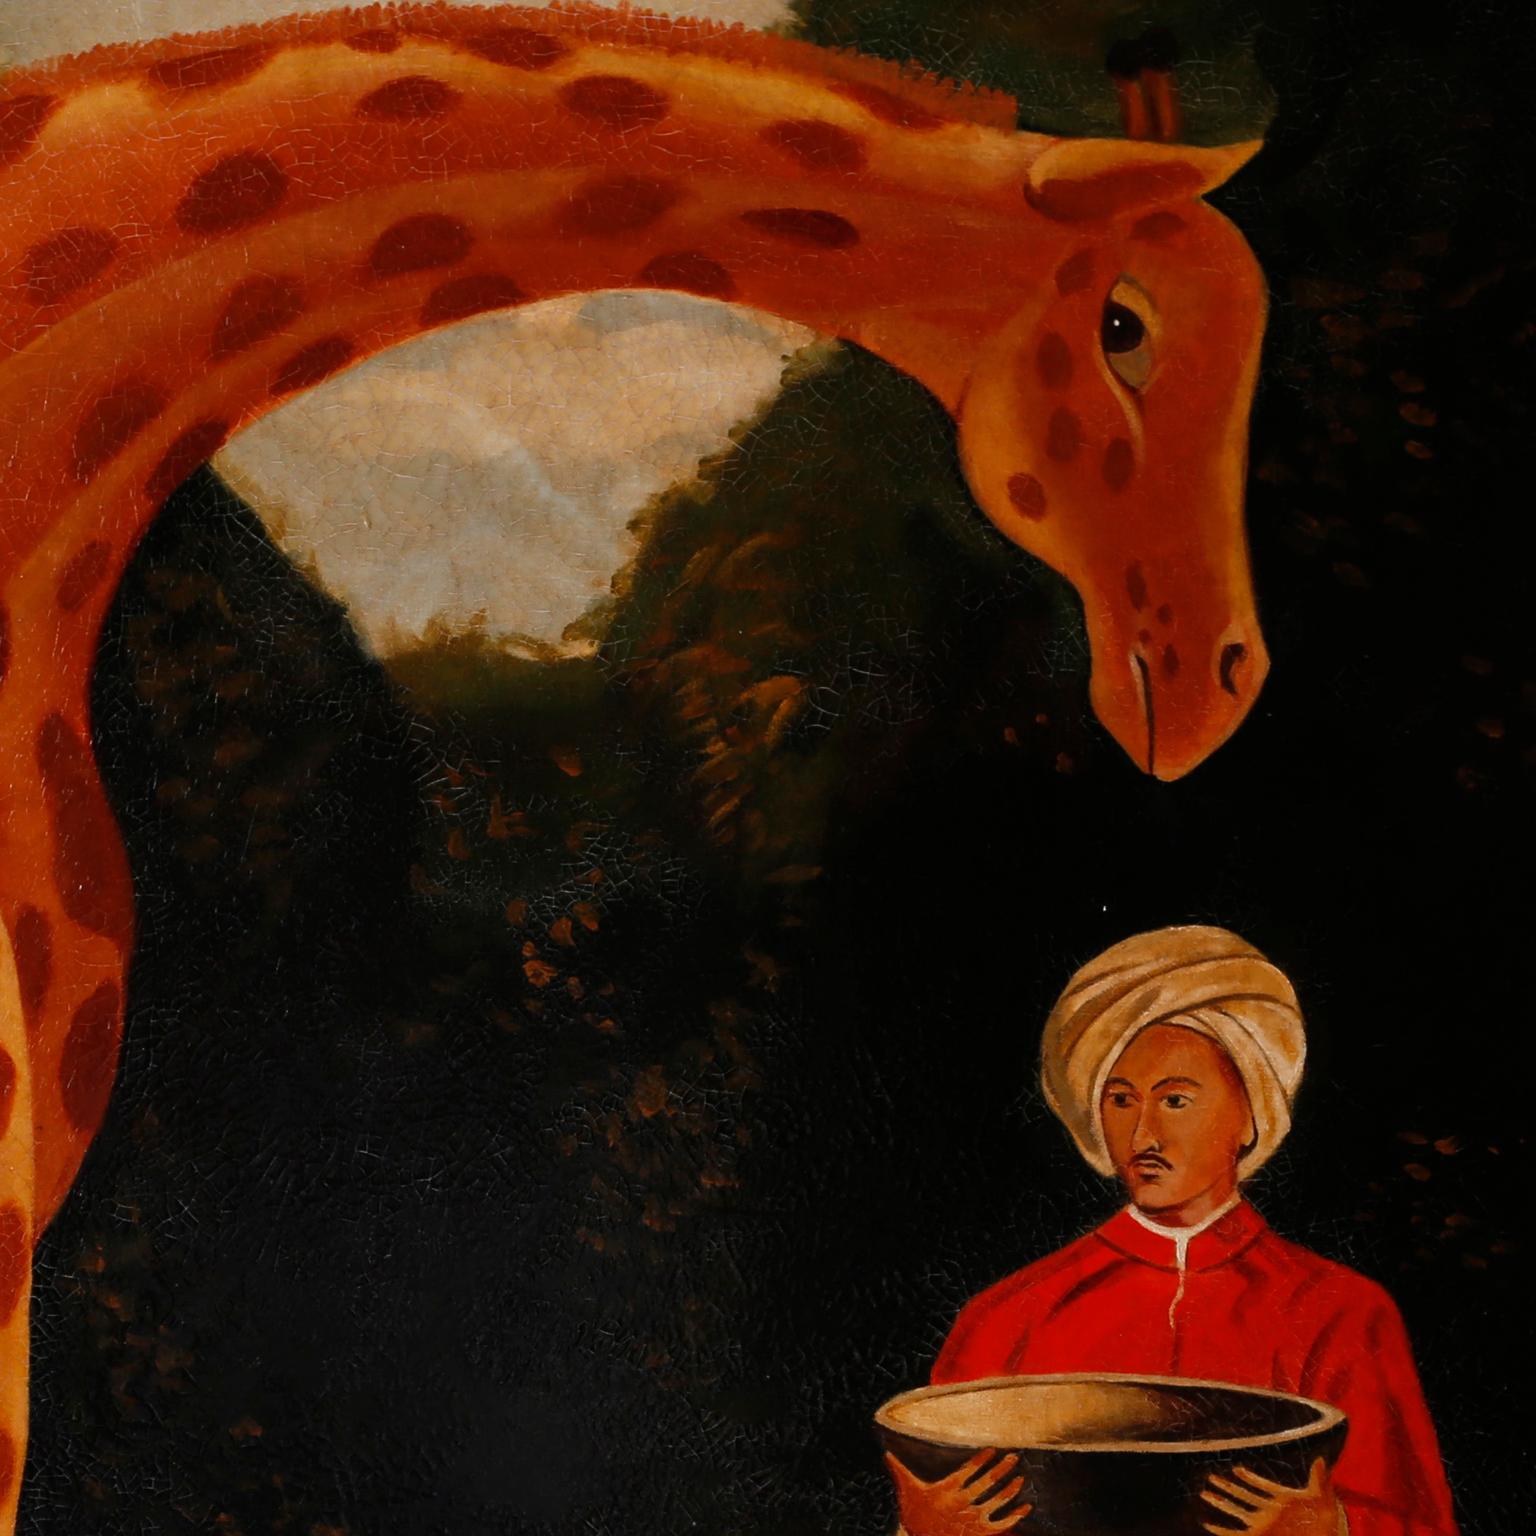 Oil Painting on Canvas of a Giraffe by Reginald Baxter 1